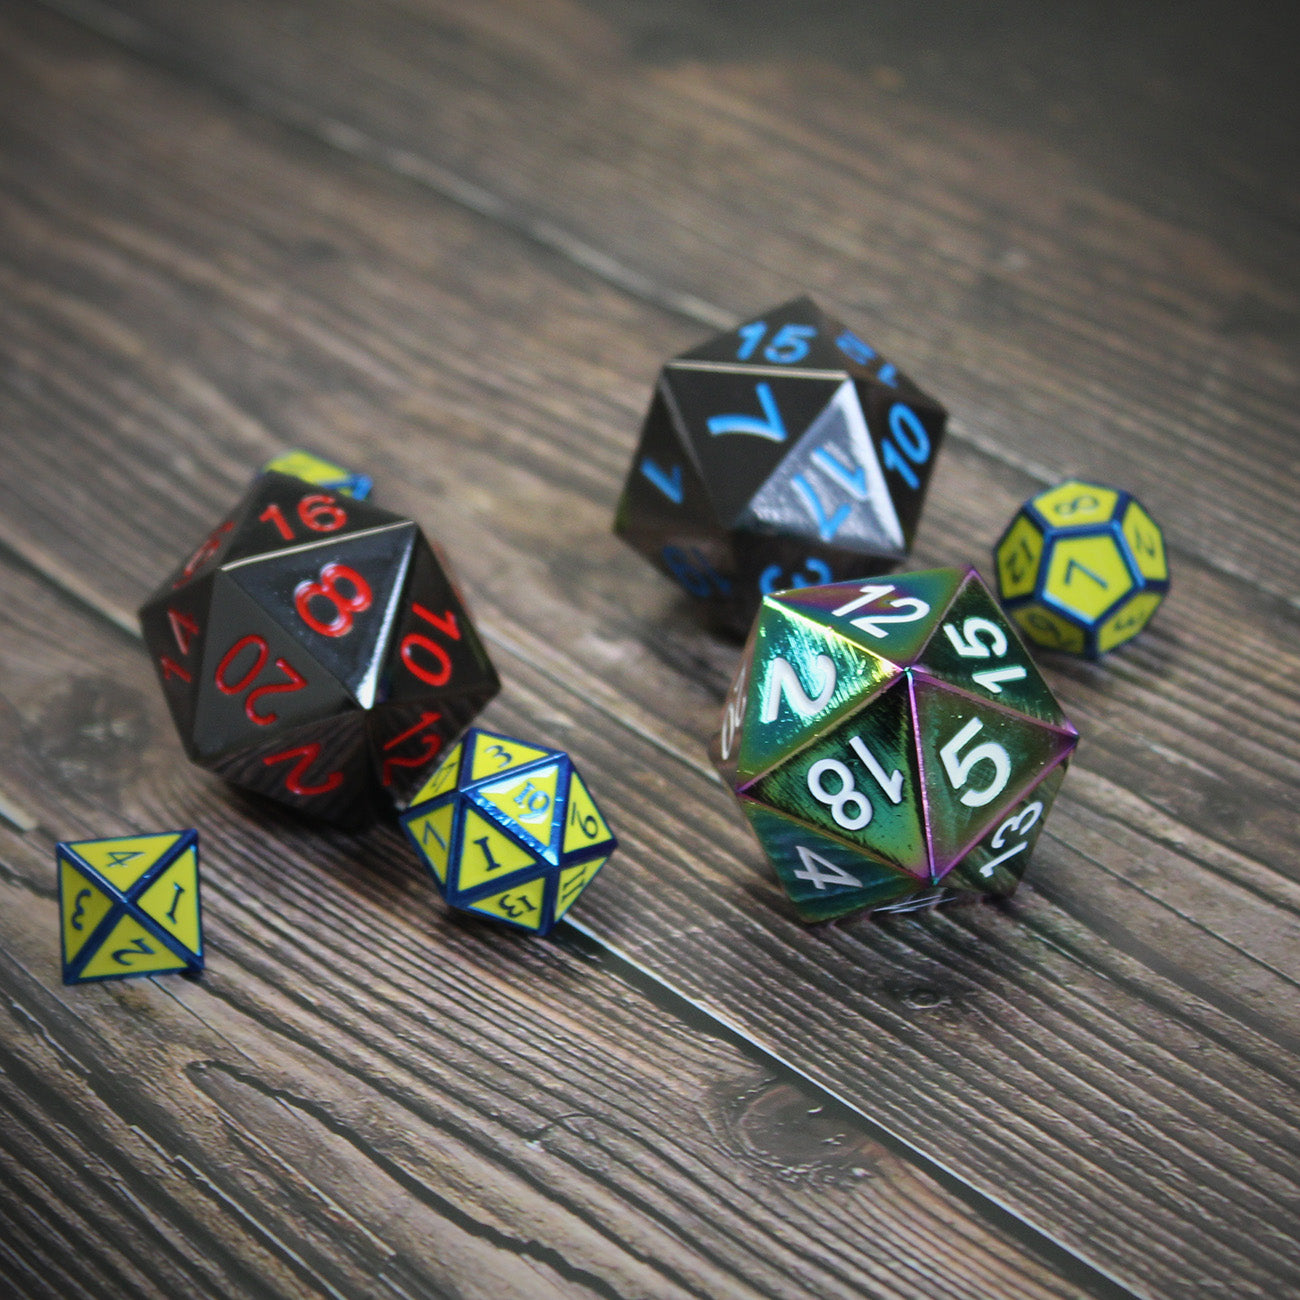 Group of Jumbo and traditional dice.